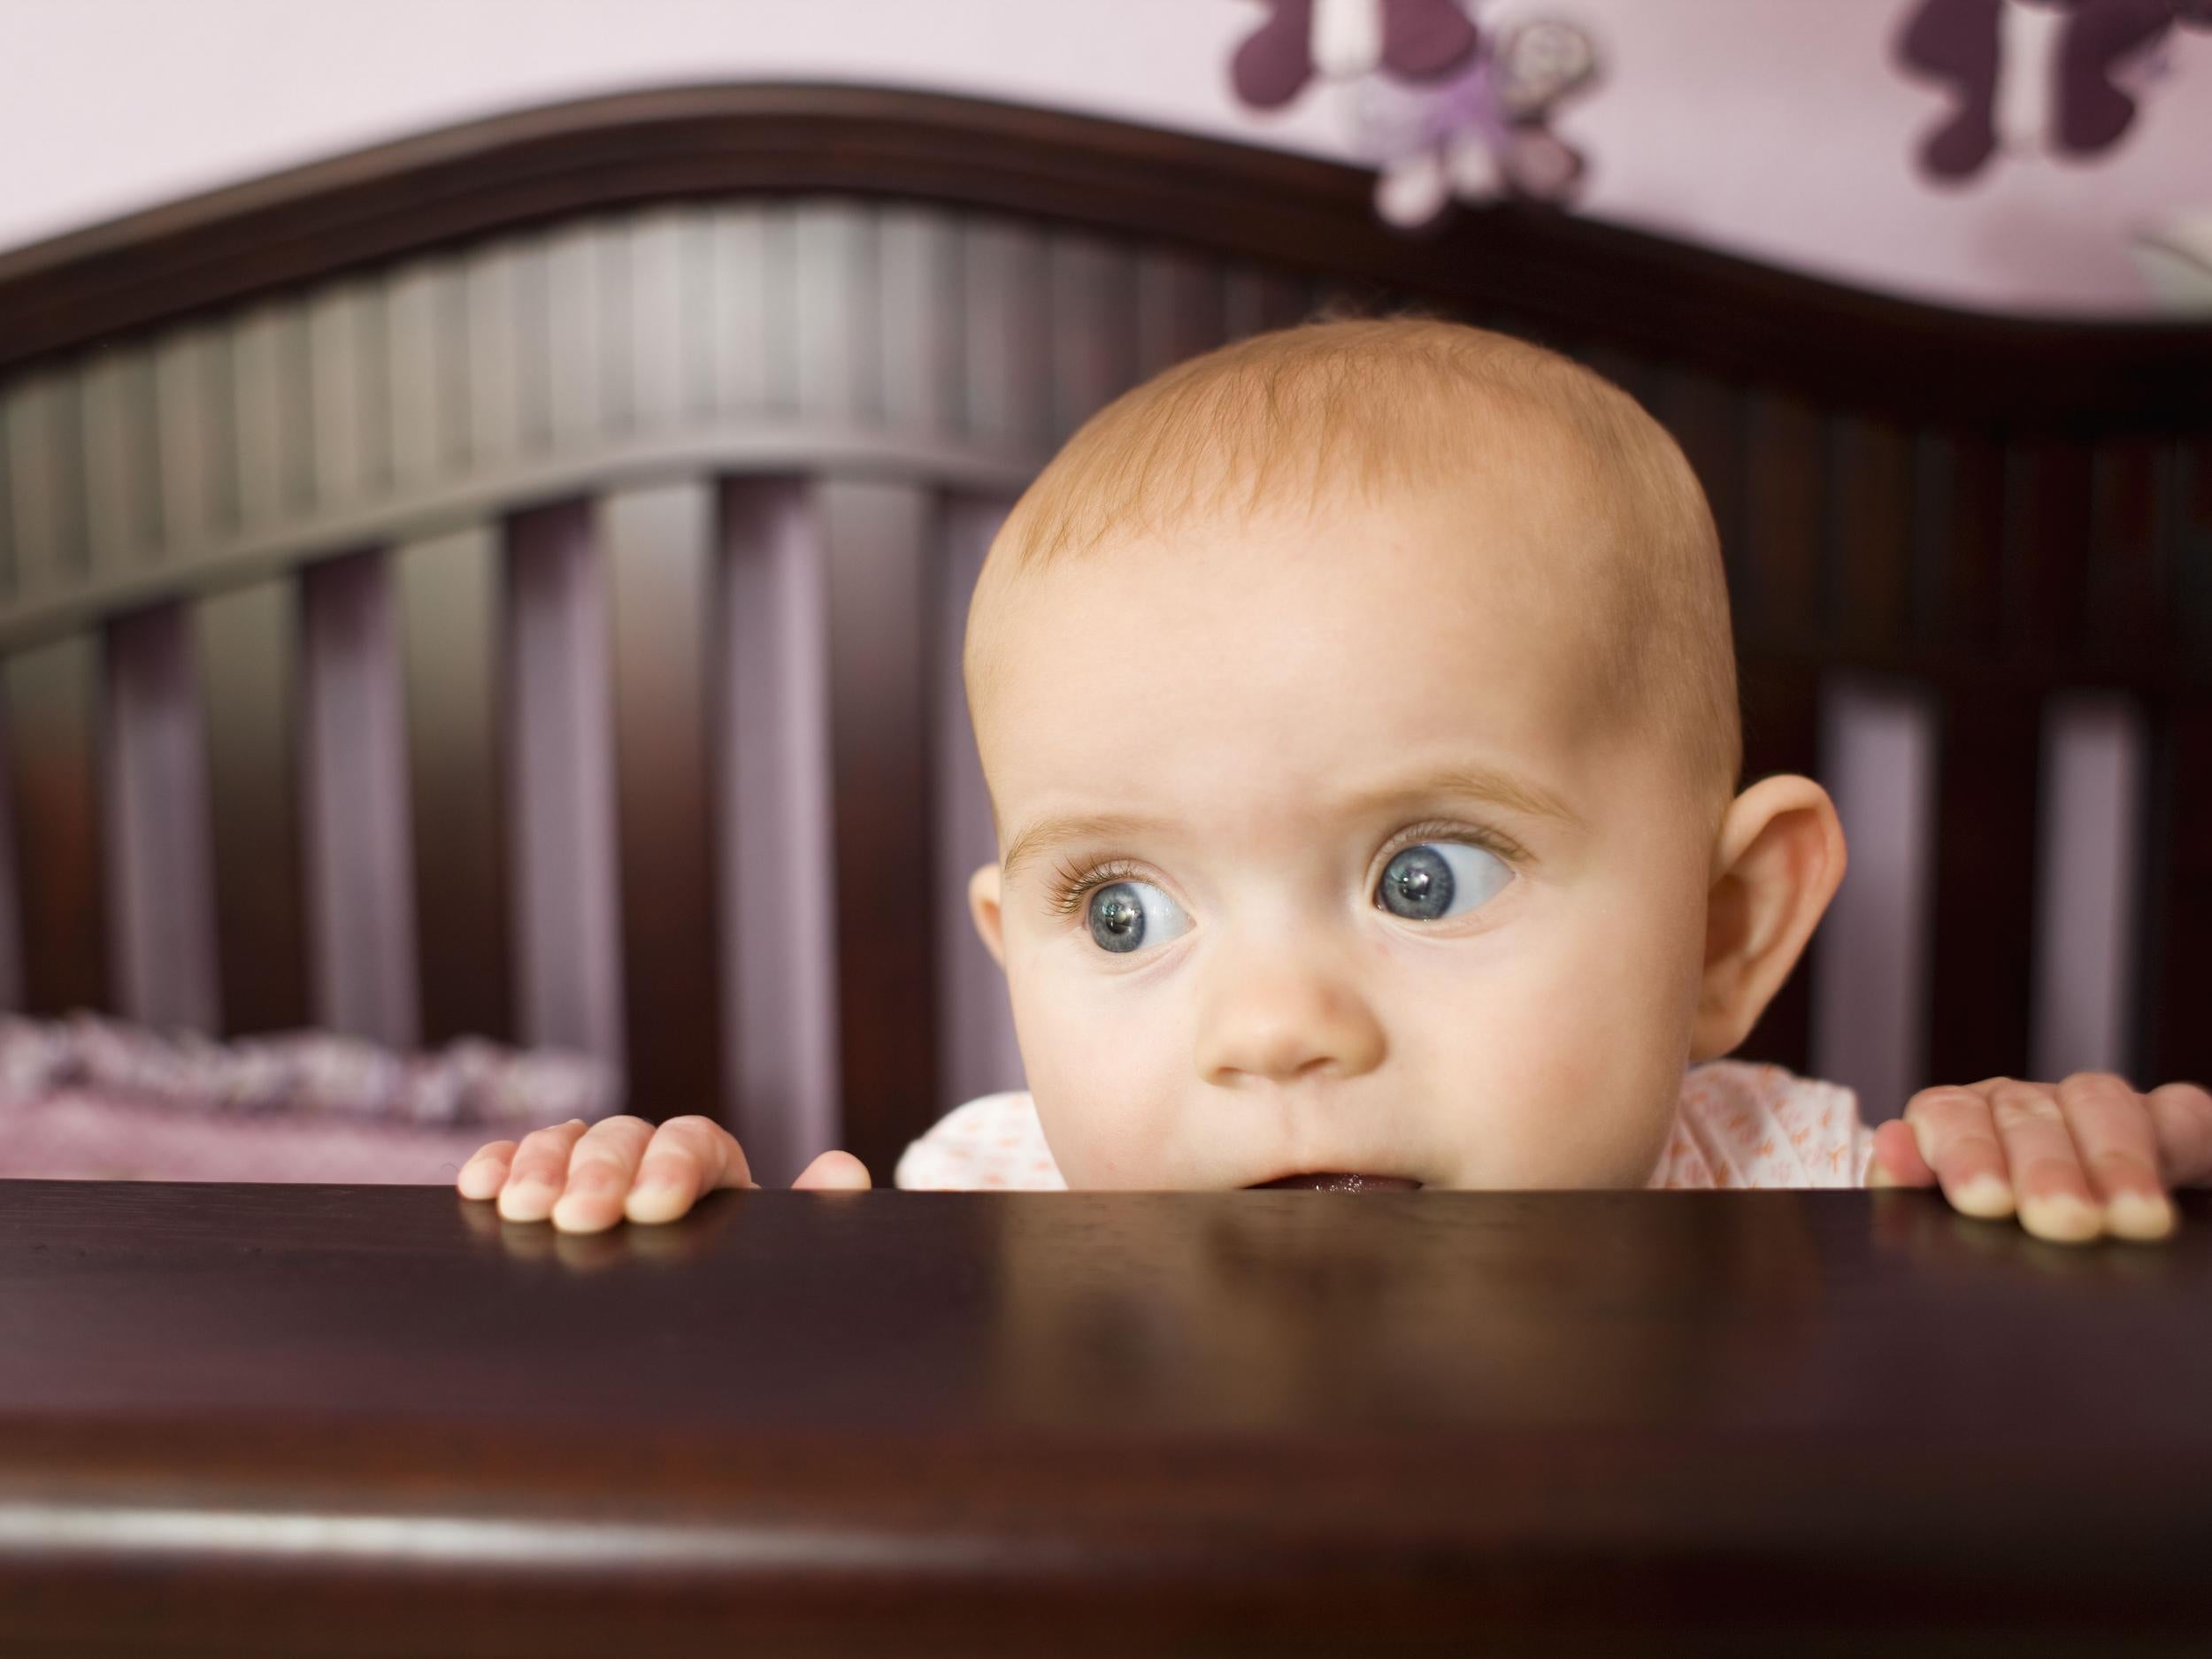 Scientists used to think babies only comprehend language from around one year onwards